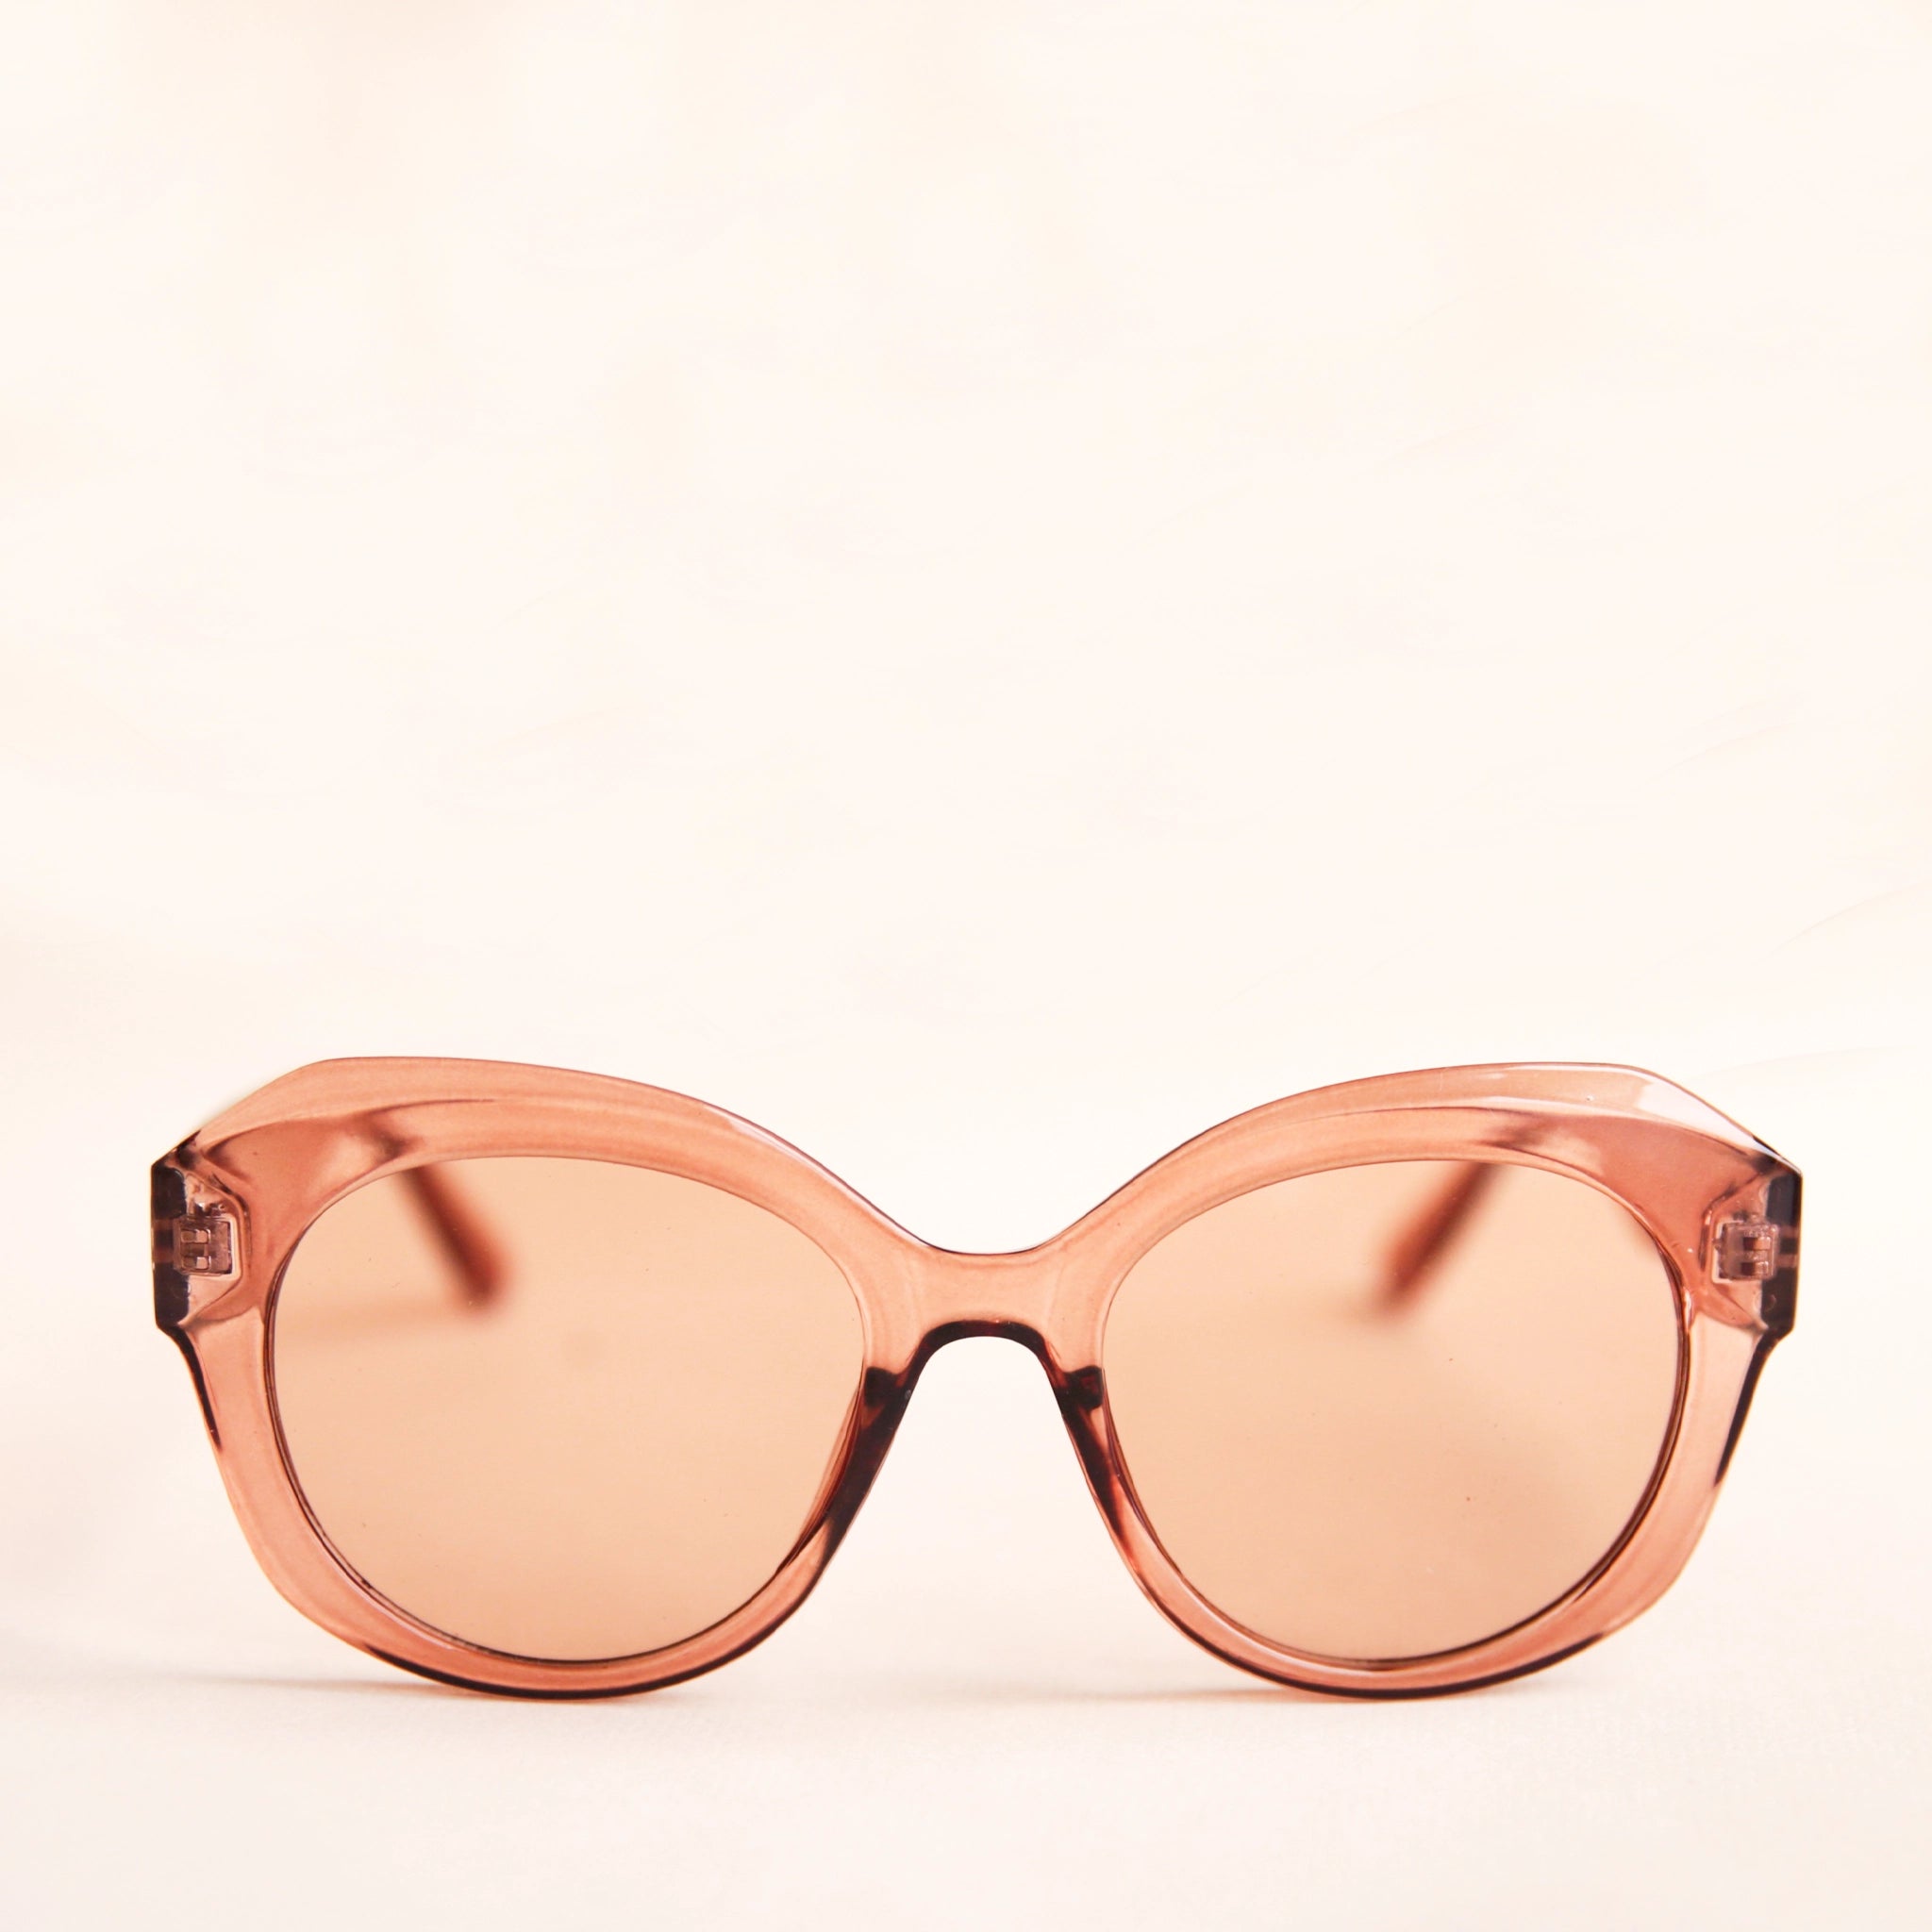 A light brown translucent pair of sunglasses that have a rounded shape and a light brown lens.